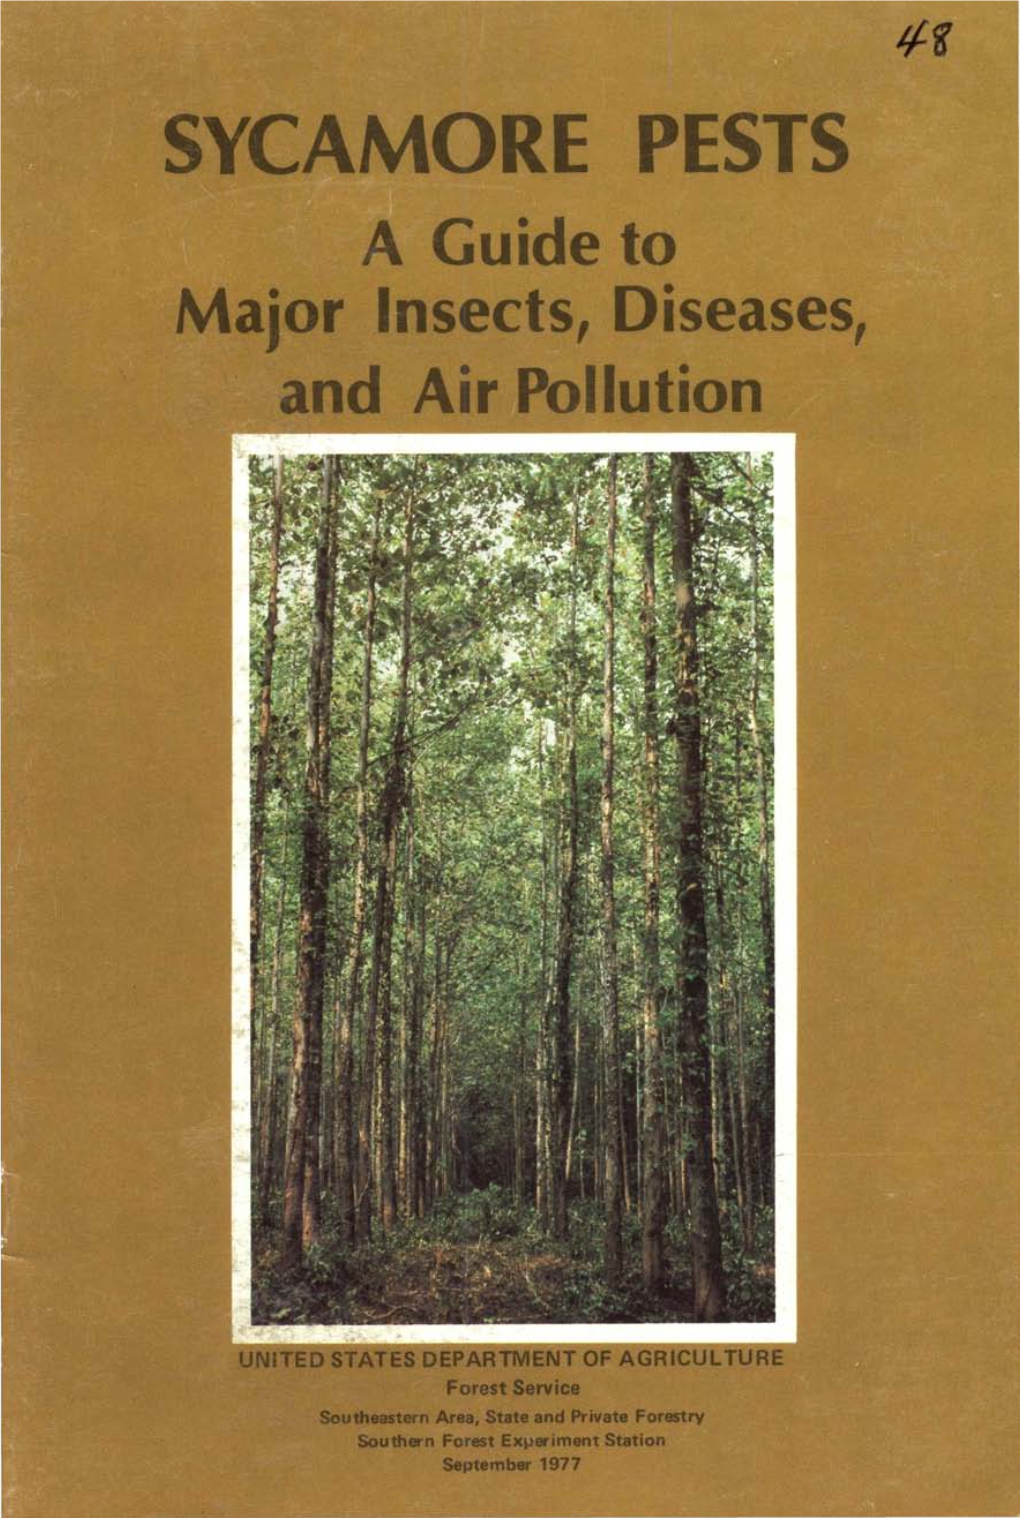 SYCAMORE PESTS a Guide to Major Insects, Diseases, and Air Pollution